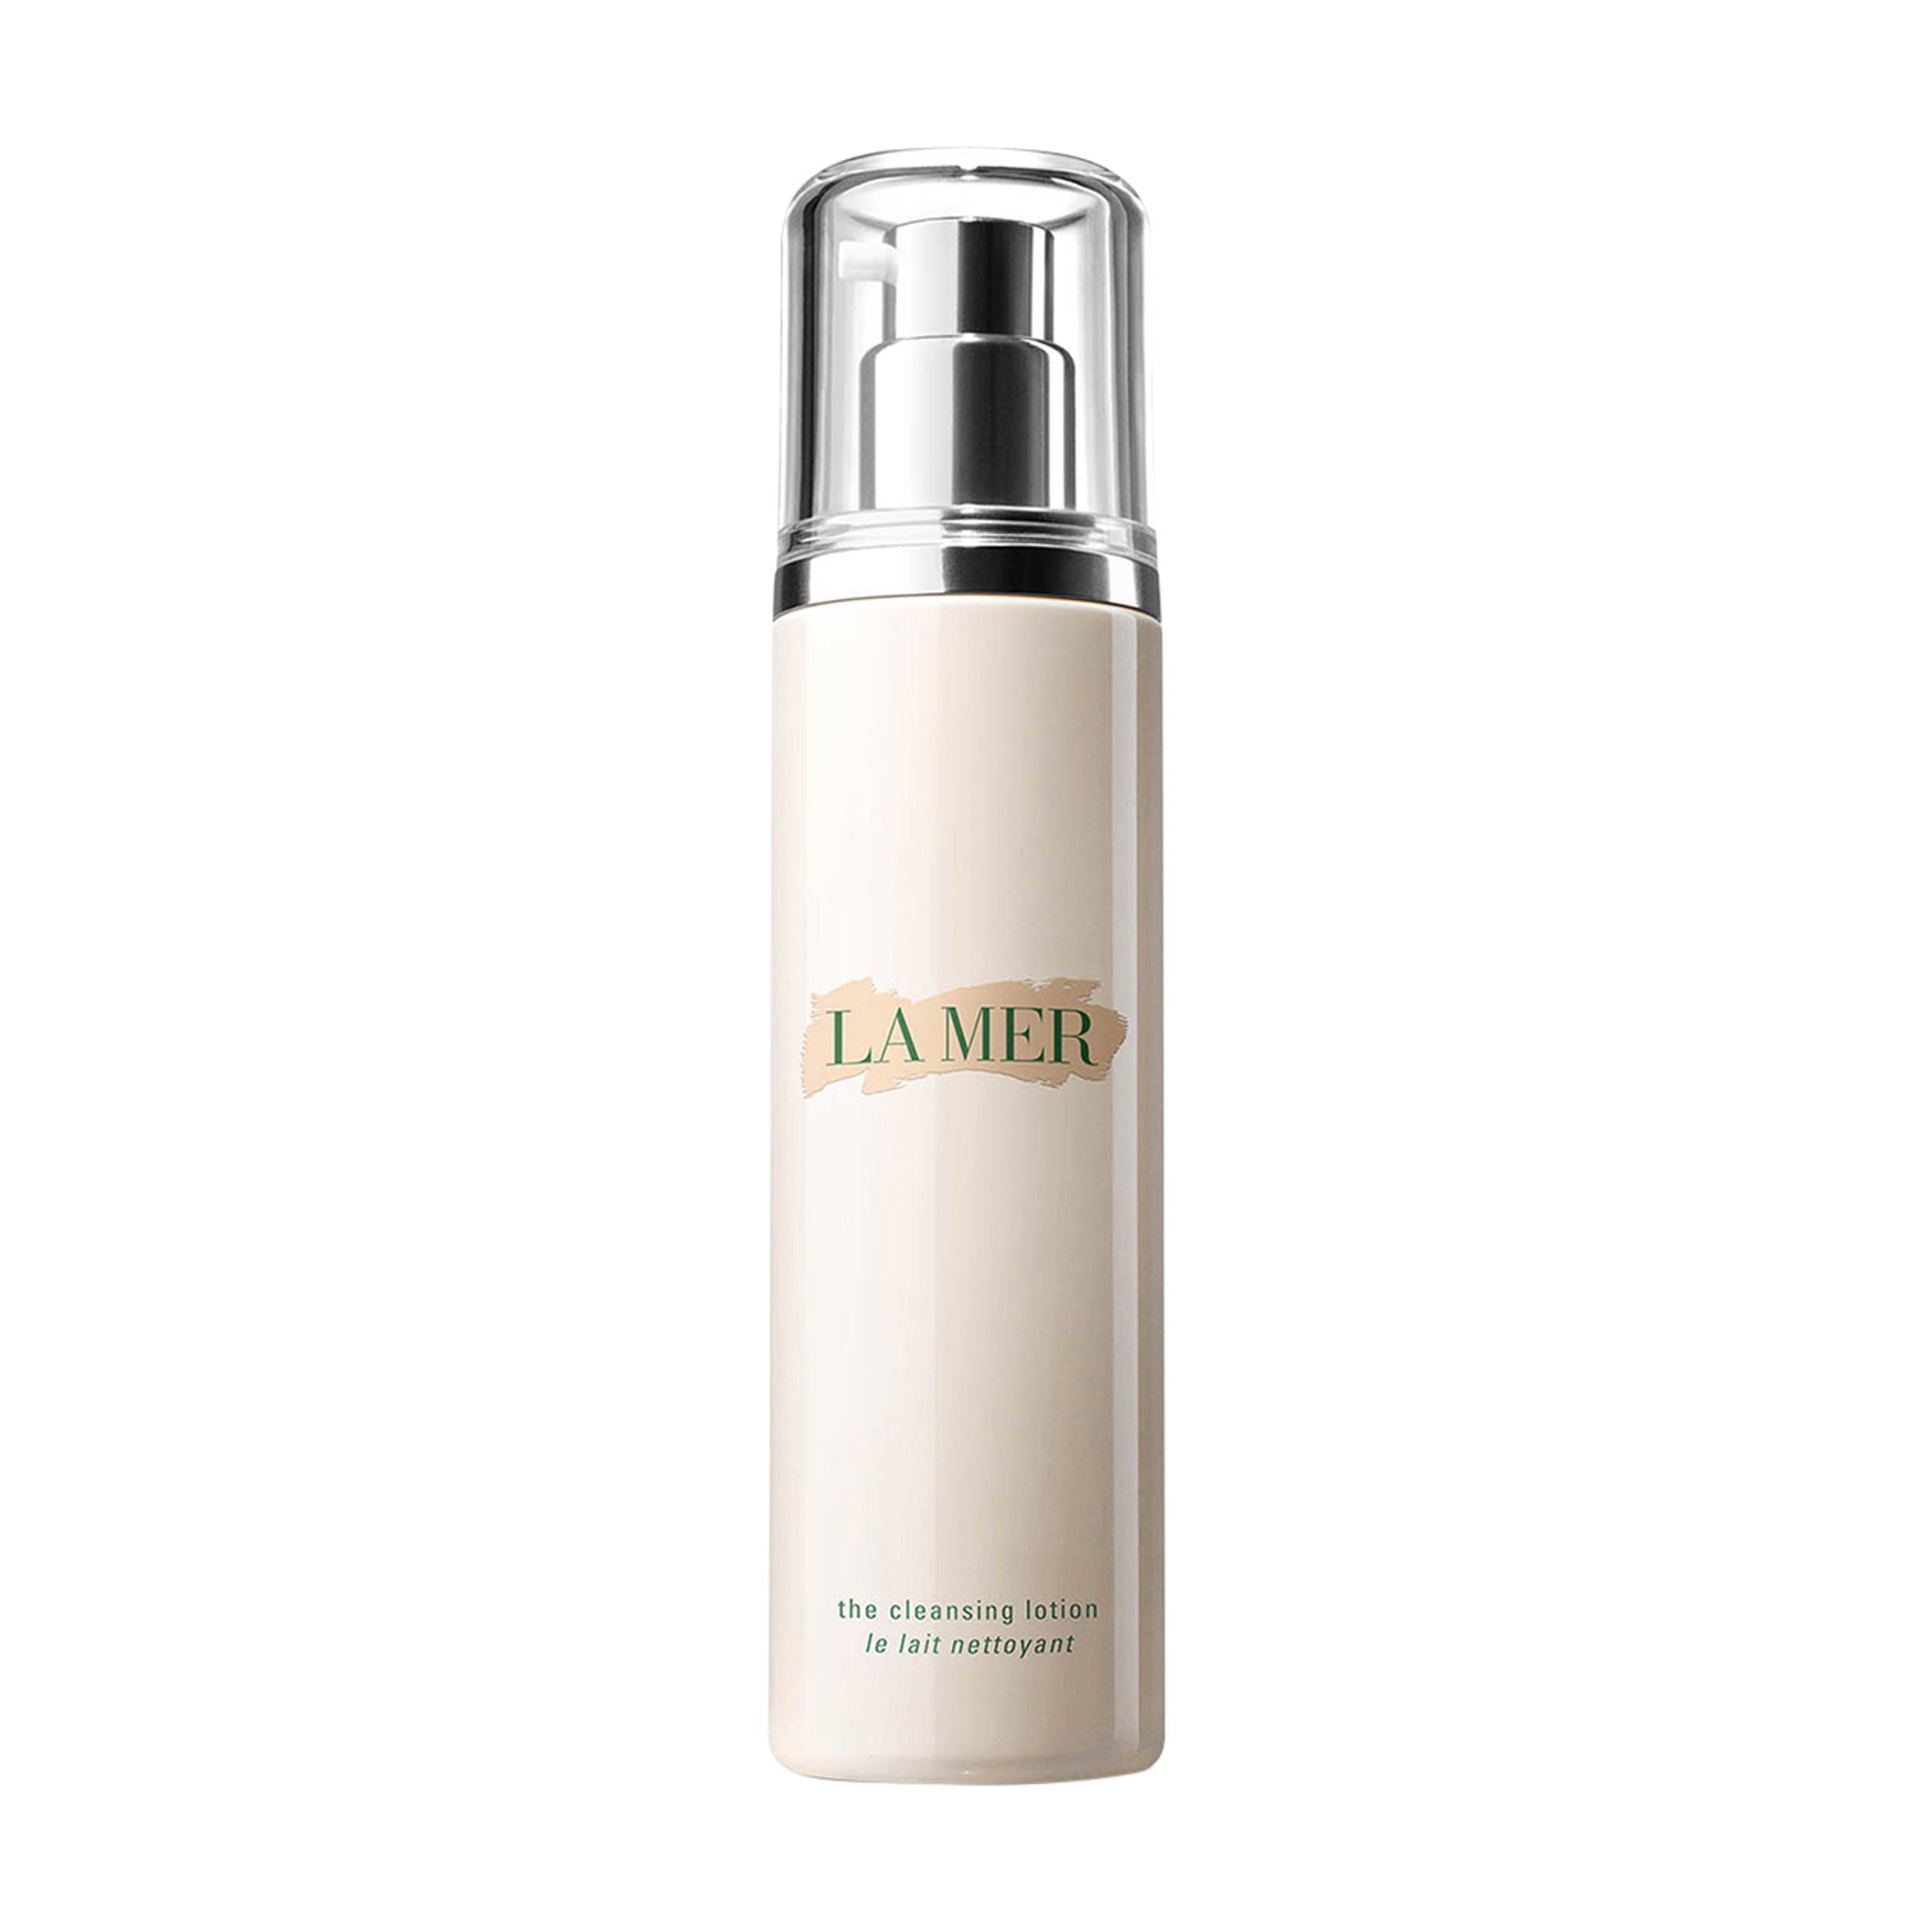 La Mer The Cleansing Lotion main image.